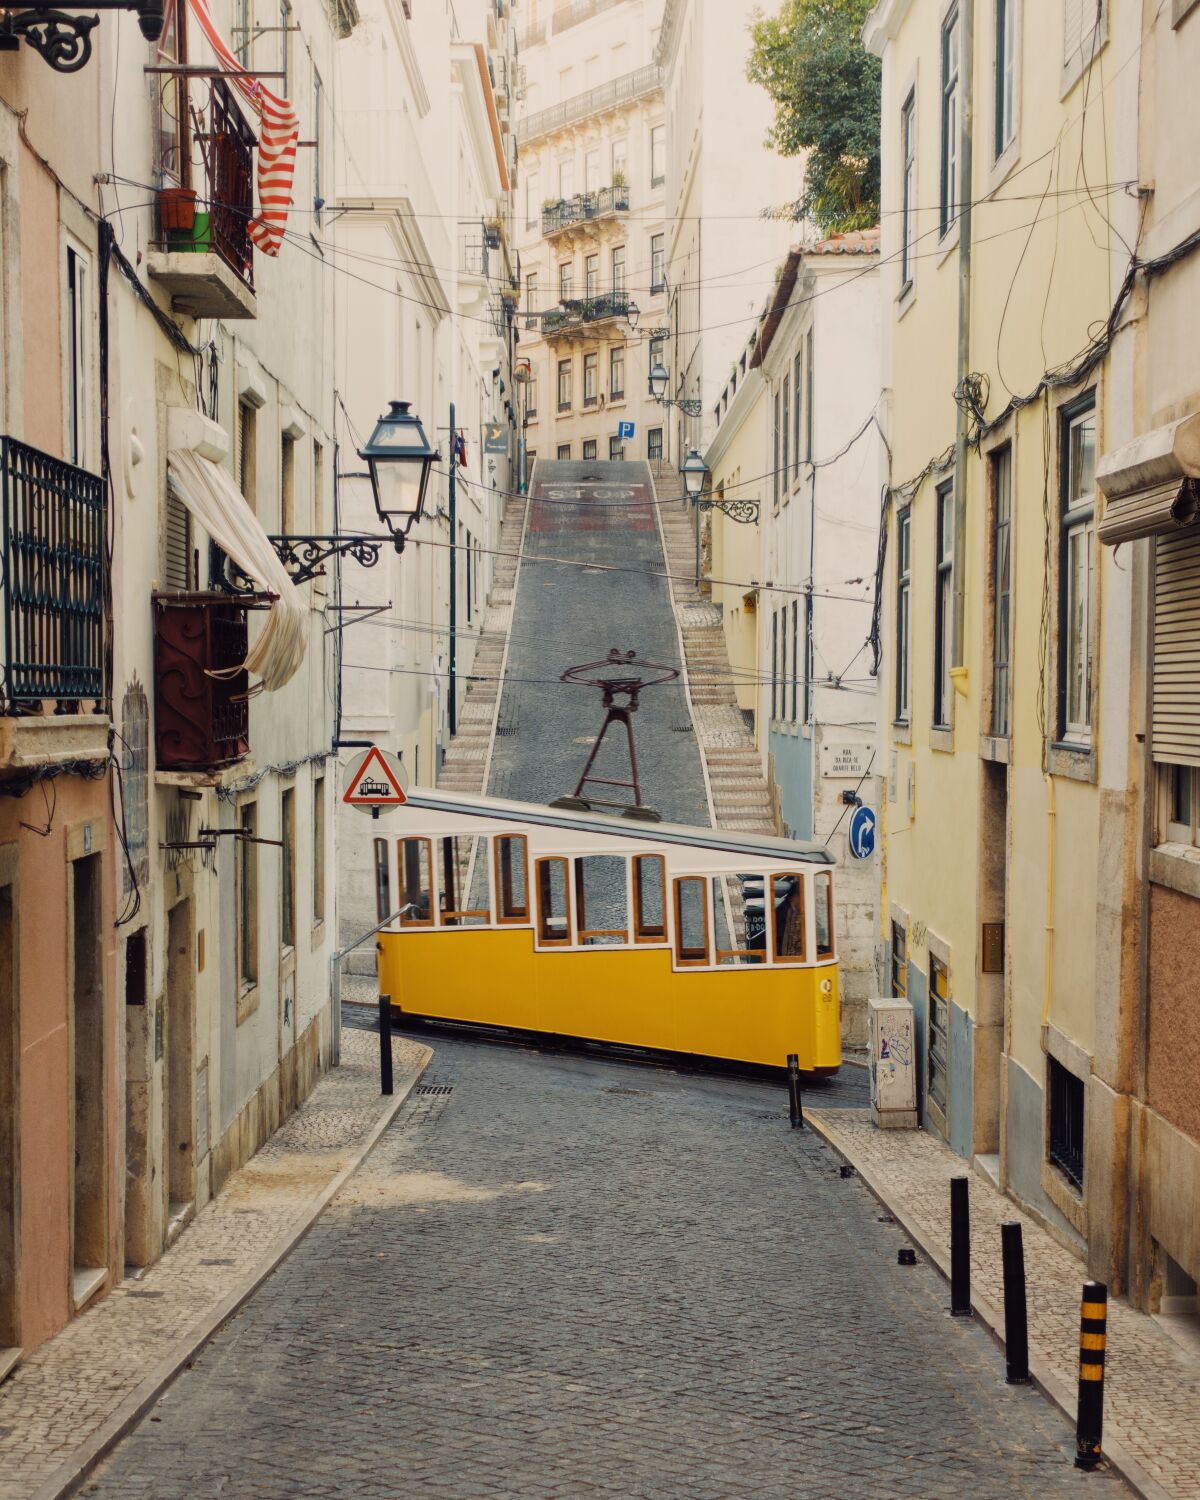 A tram in Lisbon is part of the book, "Accidentally Wes Anderson."